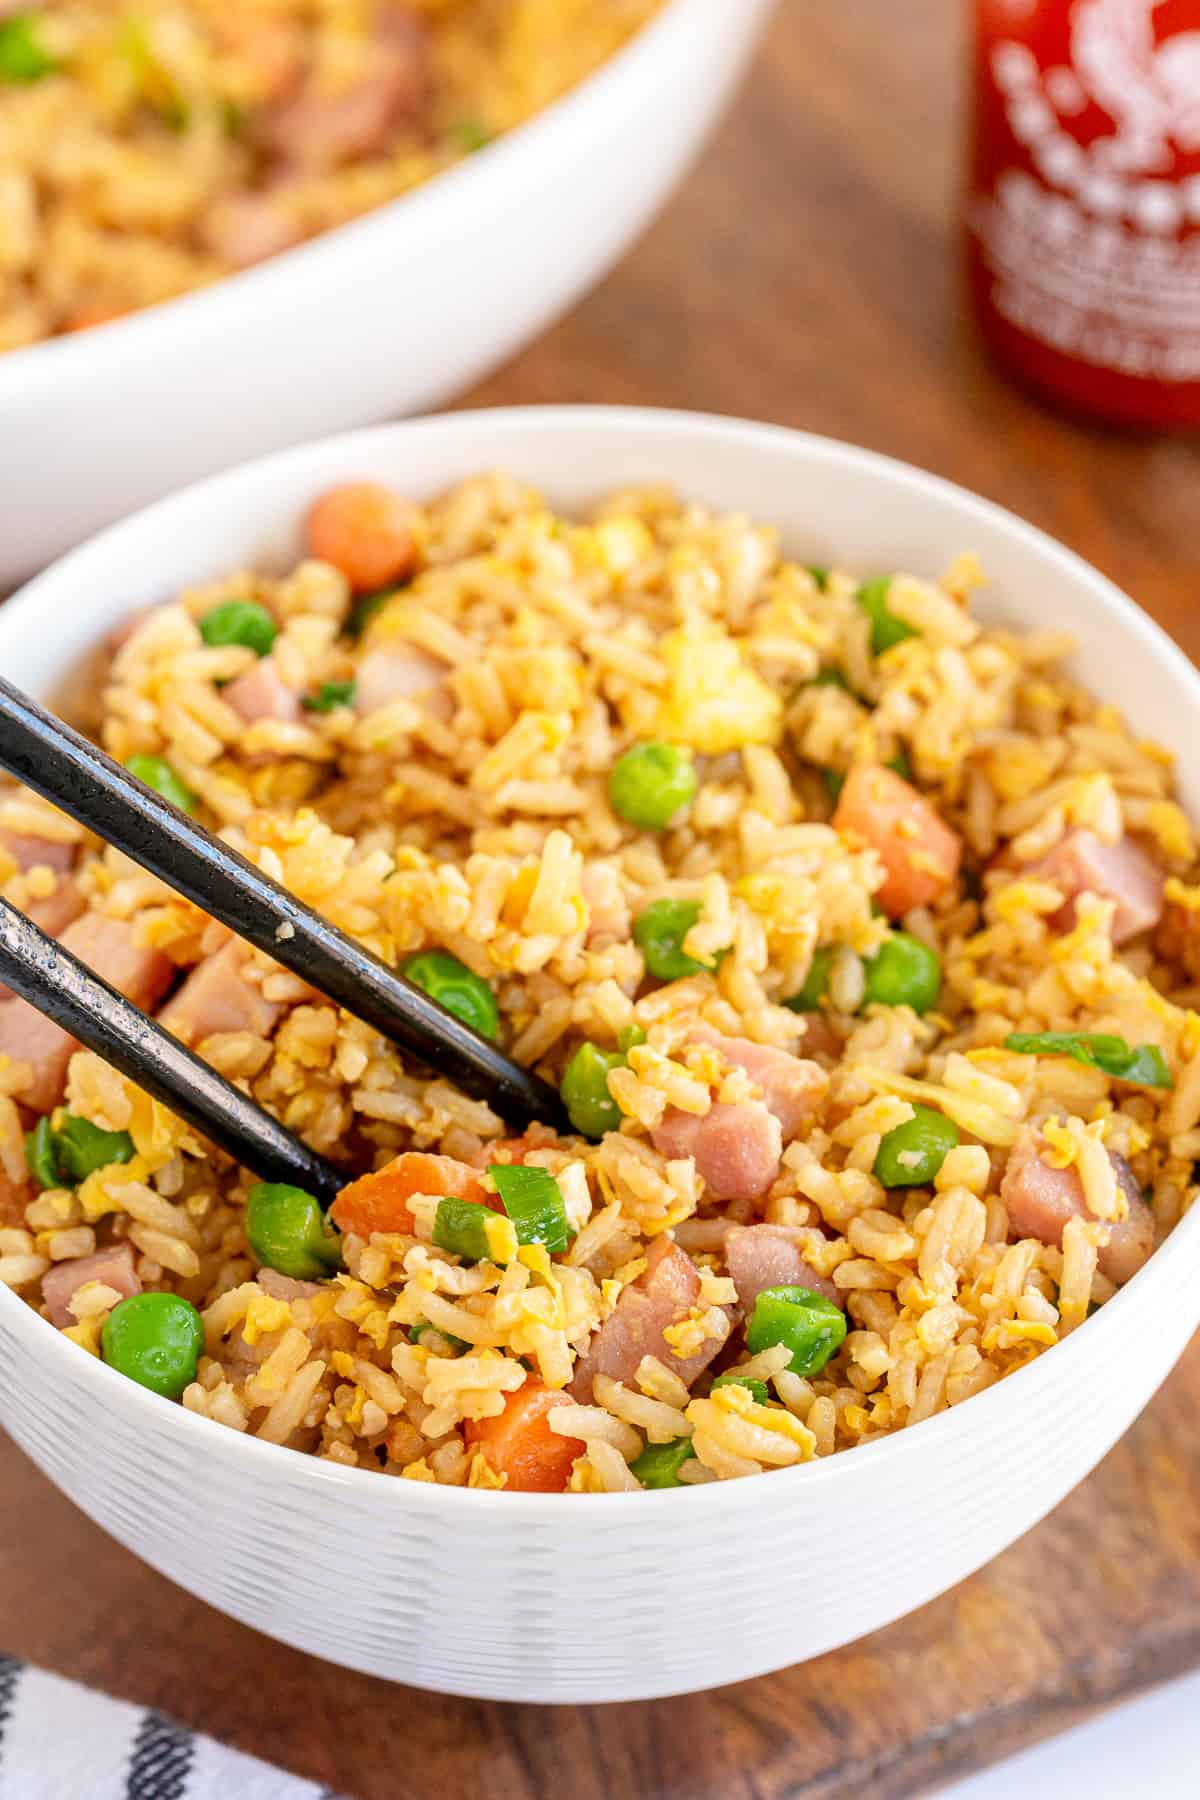 Chopsticks in a bowl of fried rice with ham.